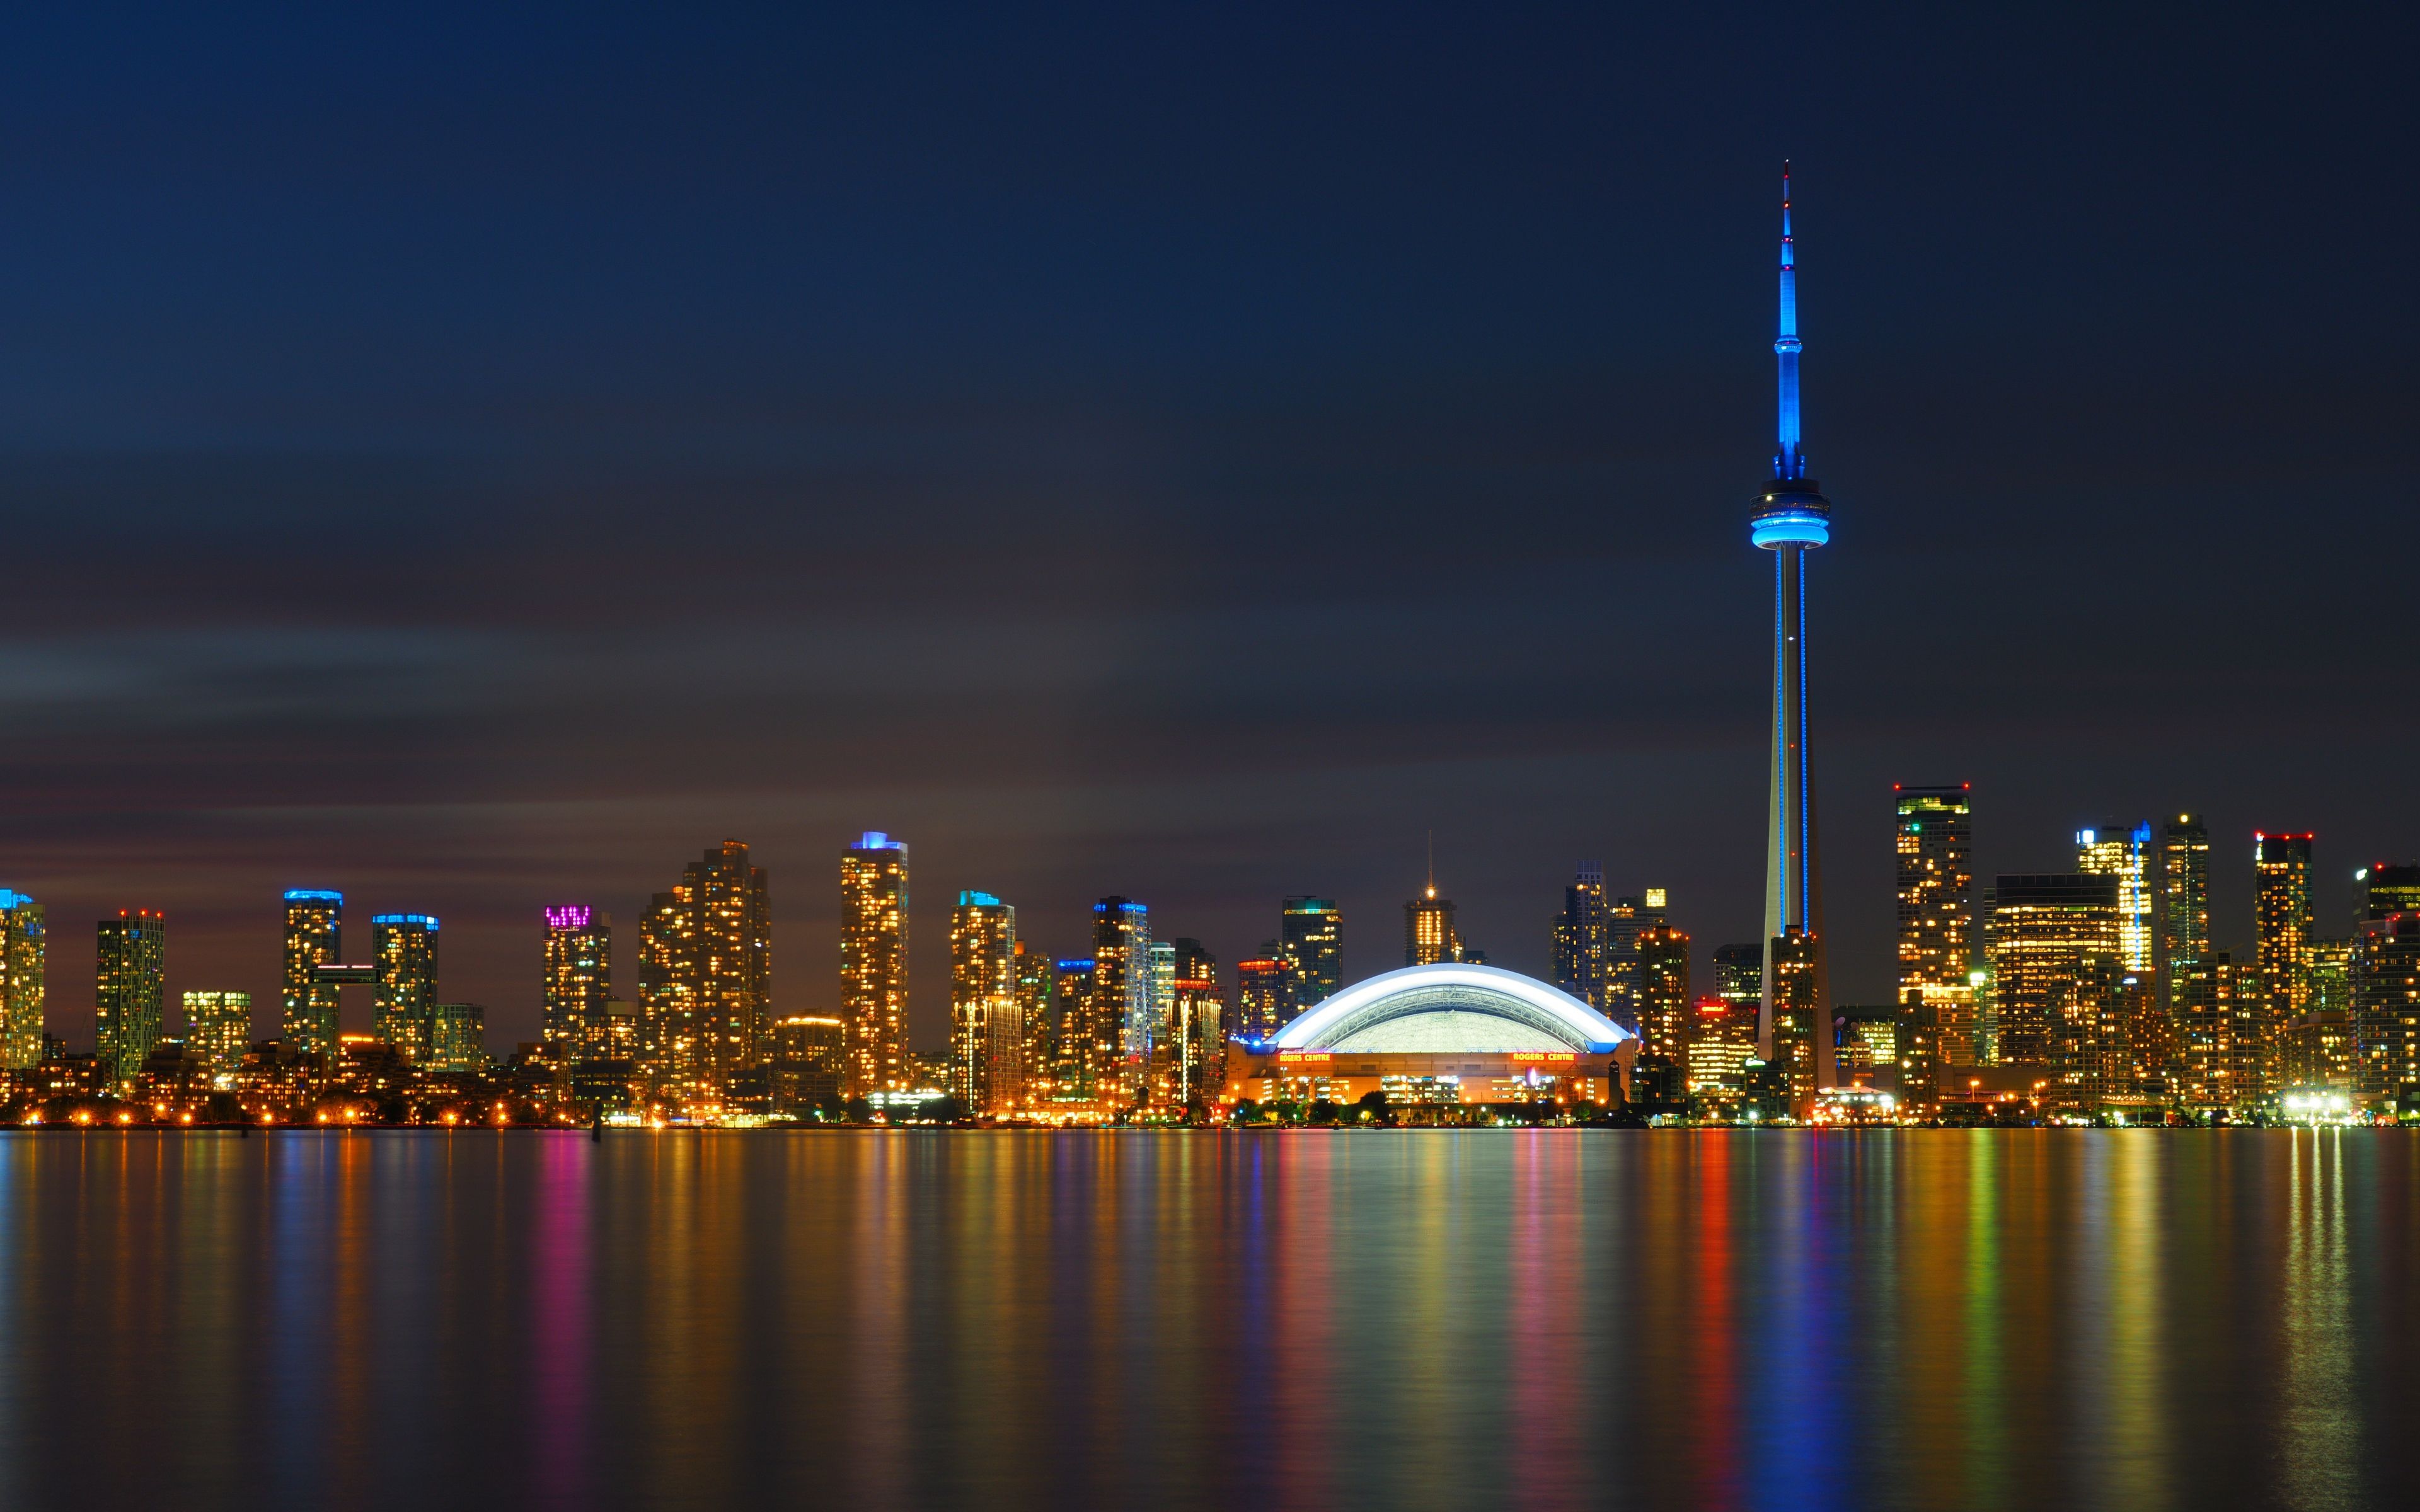 Download wallpaper Toronto, 4k, CN Tower, nightscapes, panorama, skyscrapers, Canada for desktop with resolution 3840x2400. High Quality HD picture wallpaper